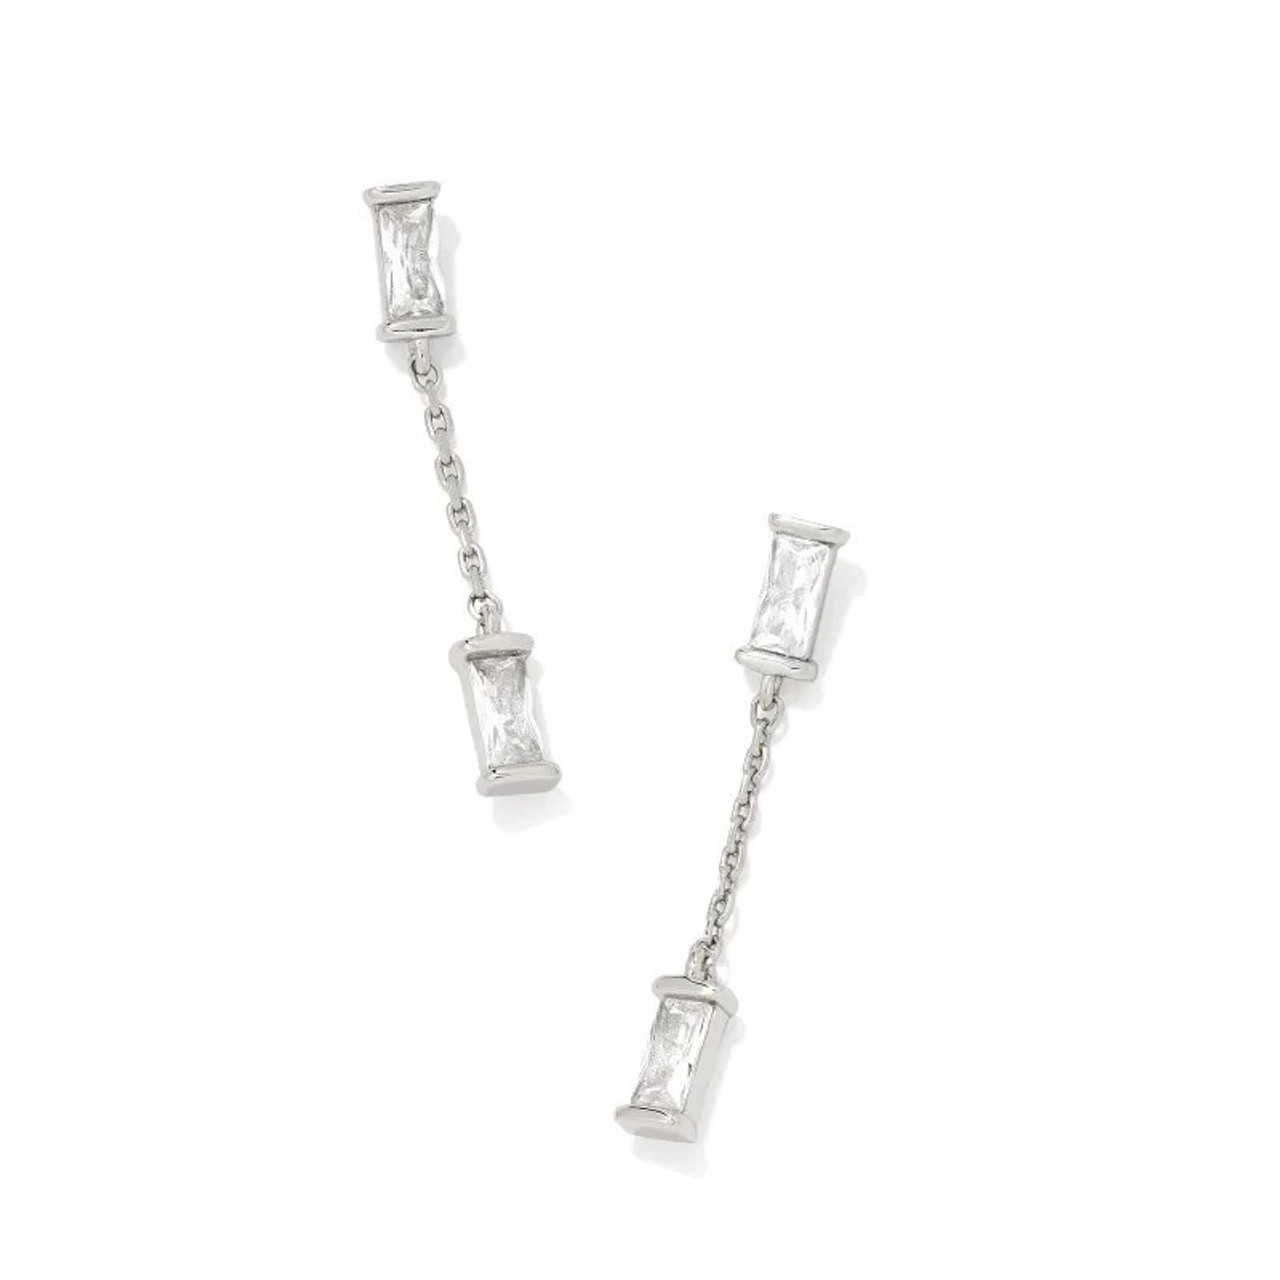 Juliette Gold Strand Necklace in White Crystal